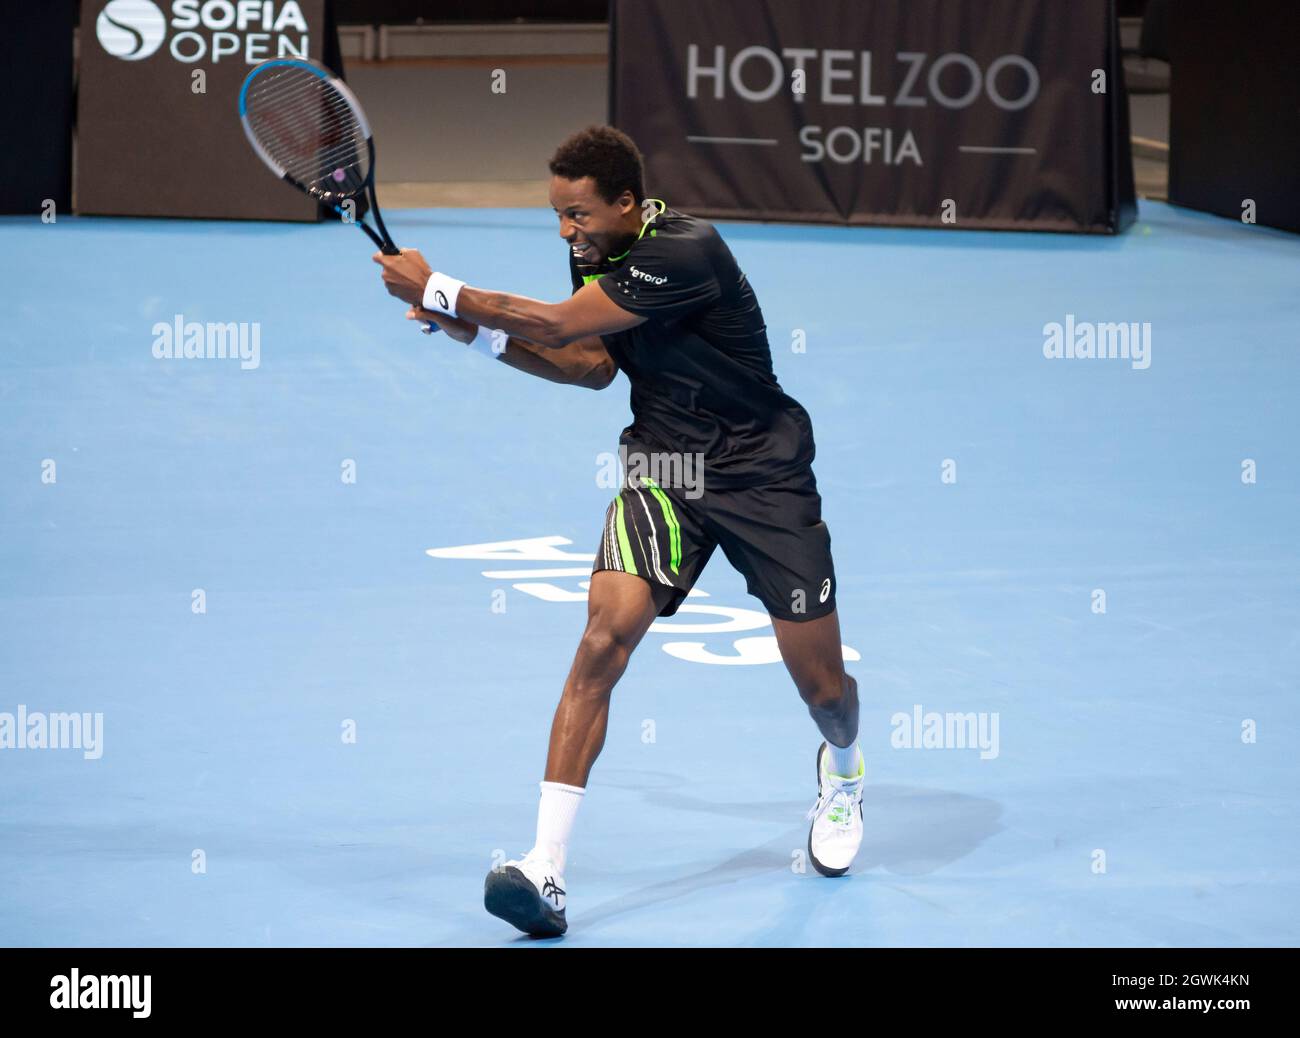 Gael Monfils, French tennis player, in action, play, playing, final, Sofia Open 2021, ATP 250, indoor tennis tournament, hard courts, Ognyan Yosifov, Alamy Live News, sport news 2021, 2021 tennis, ATP 250 2021, blue hard court, indoor championship, indoor tournament, Stock Photo